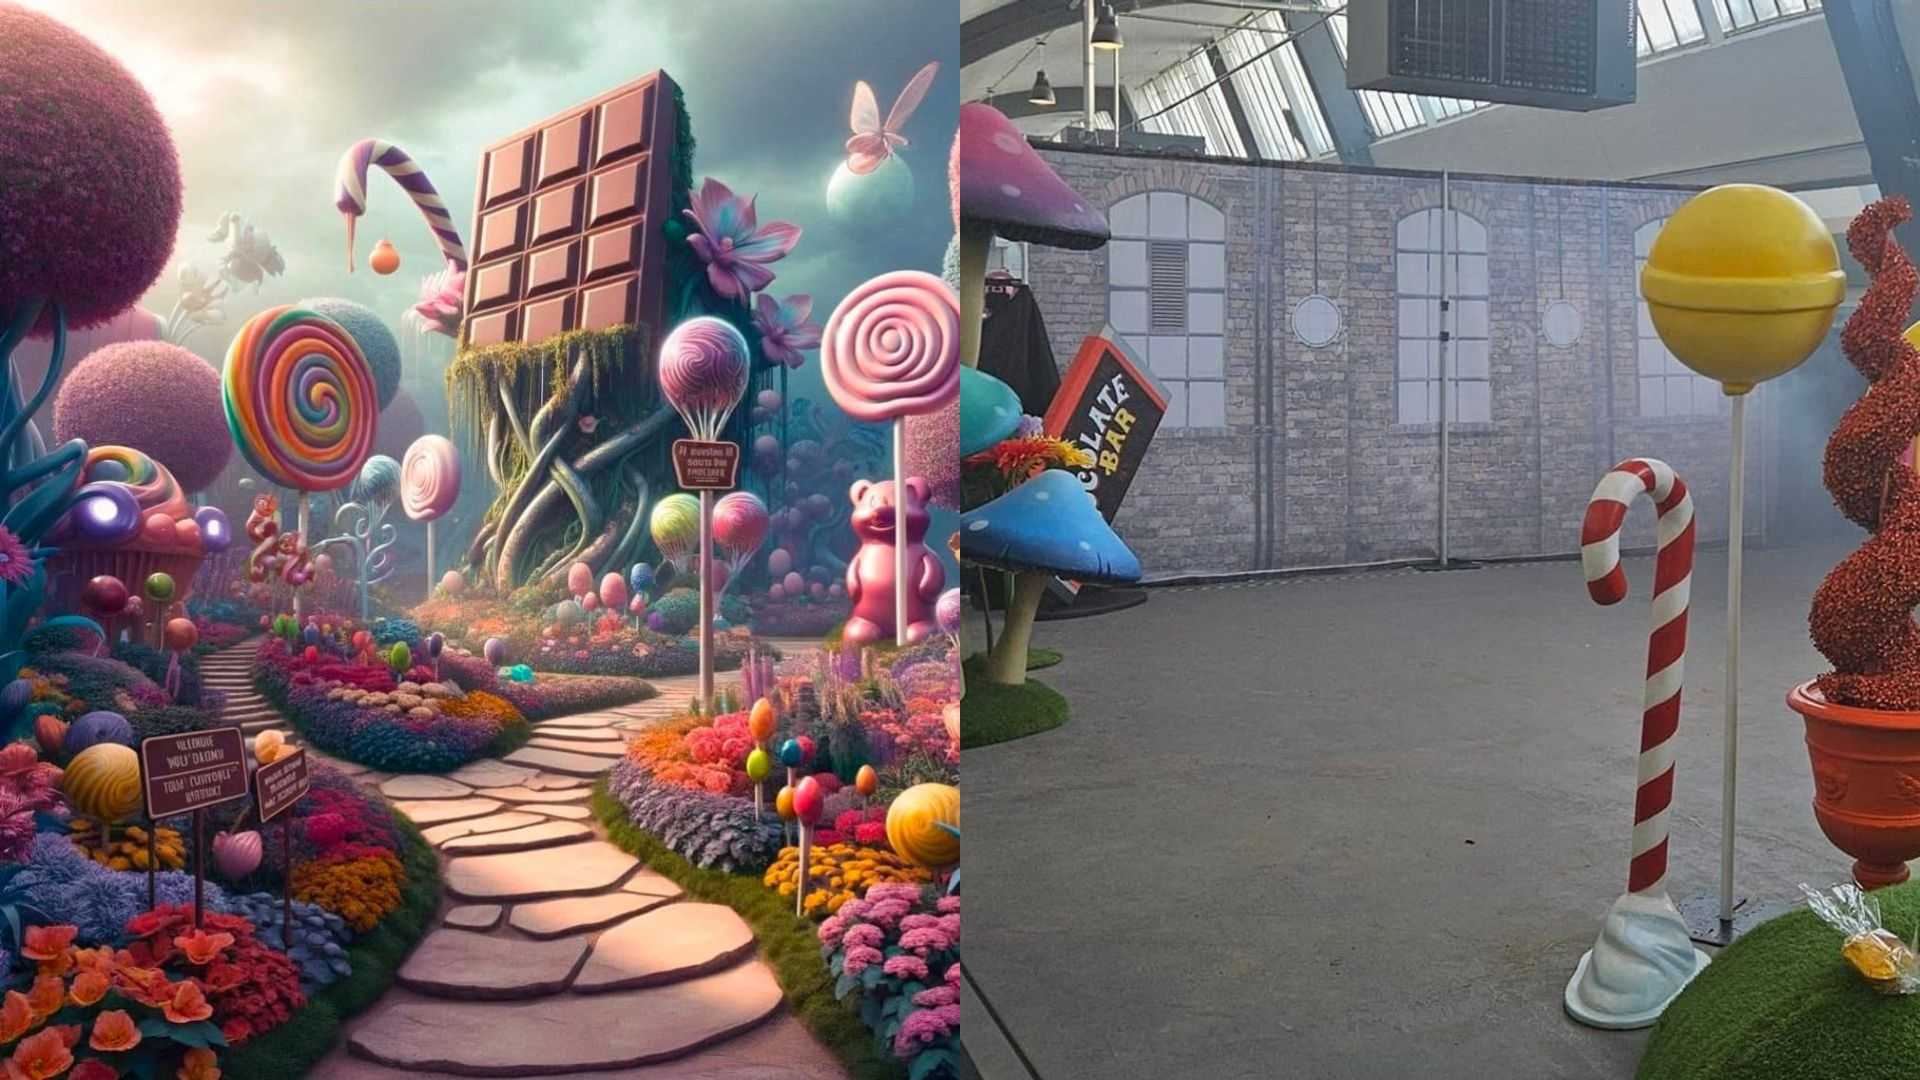 ‘Willy Wonka’ inspired event advertised with AI draws backlash